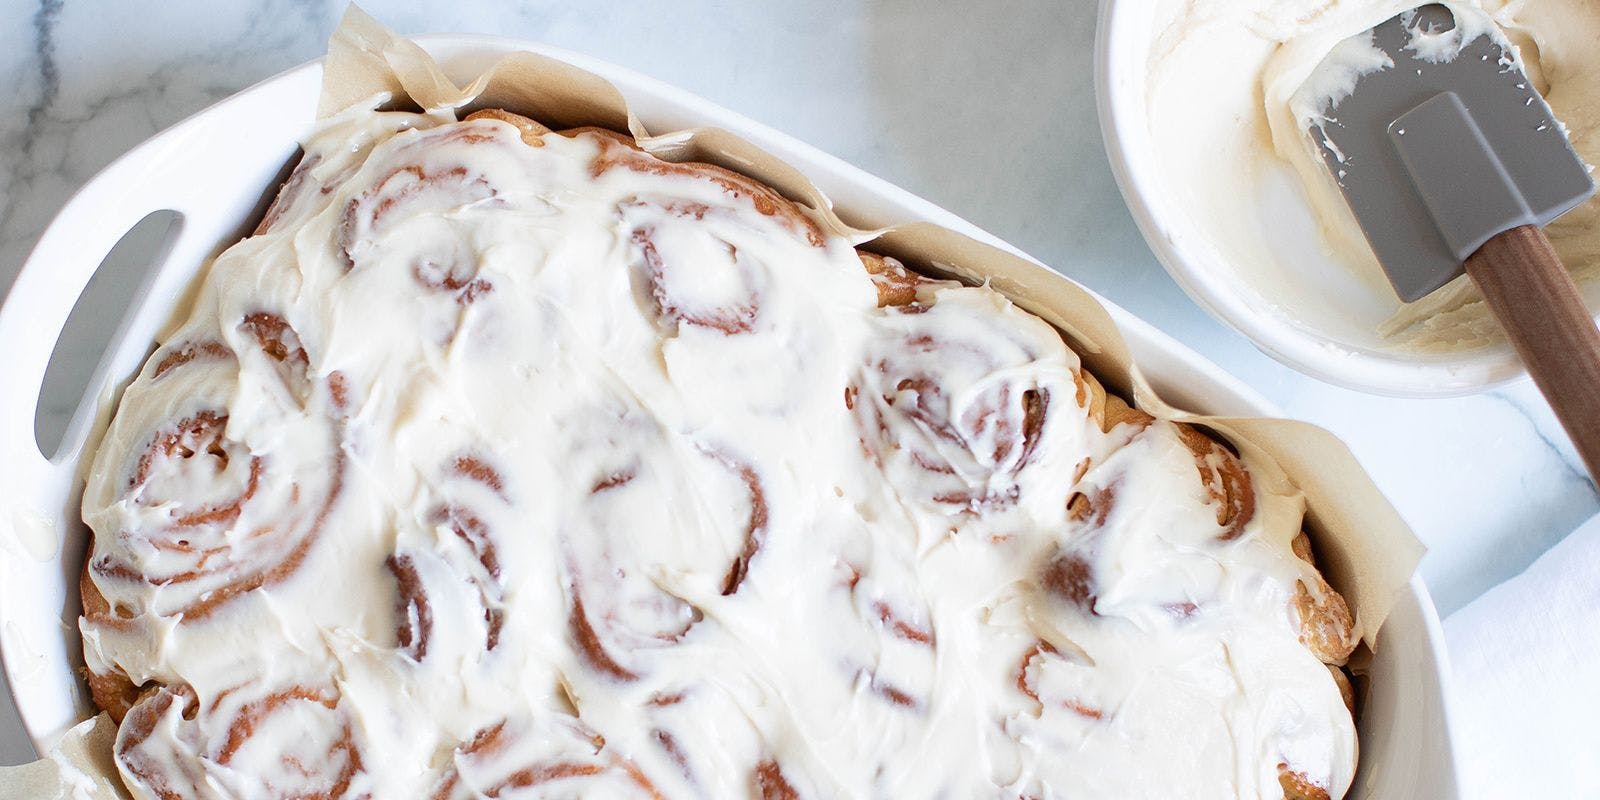 Freshly baked cinnamon rolls with cream cheese frosting. Photo by Orchids + Sweet Tea.